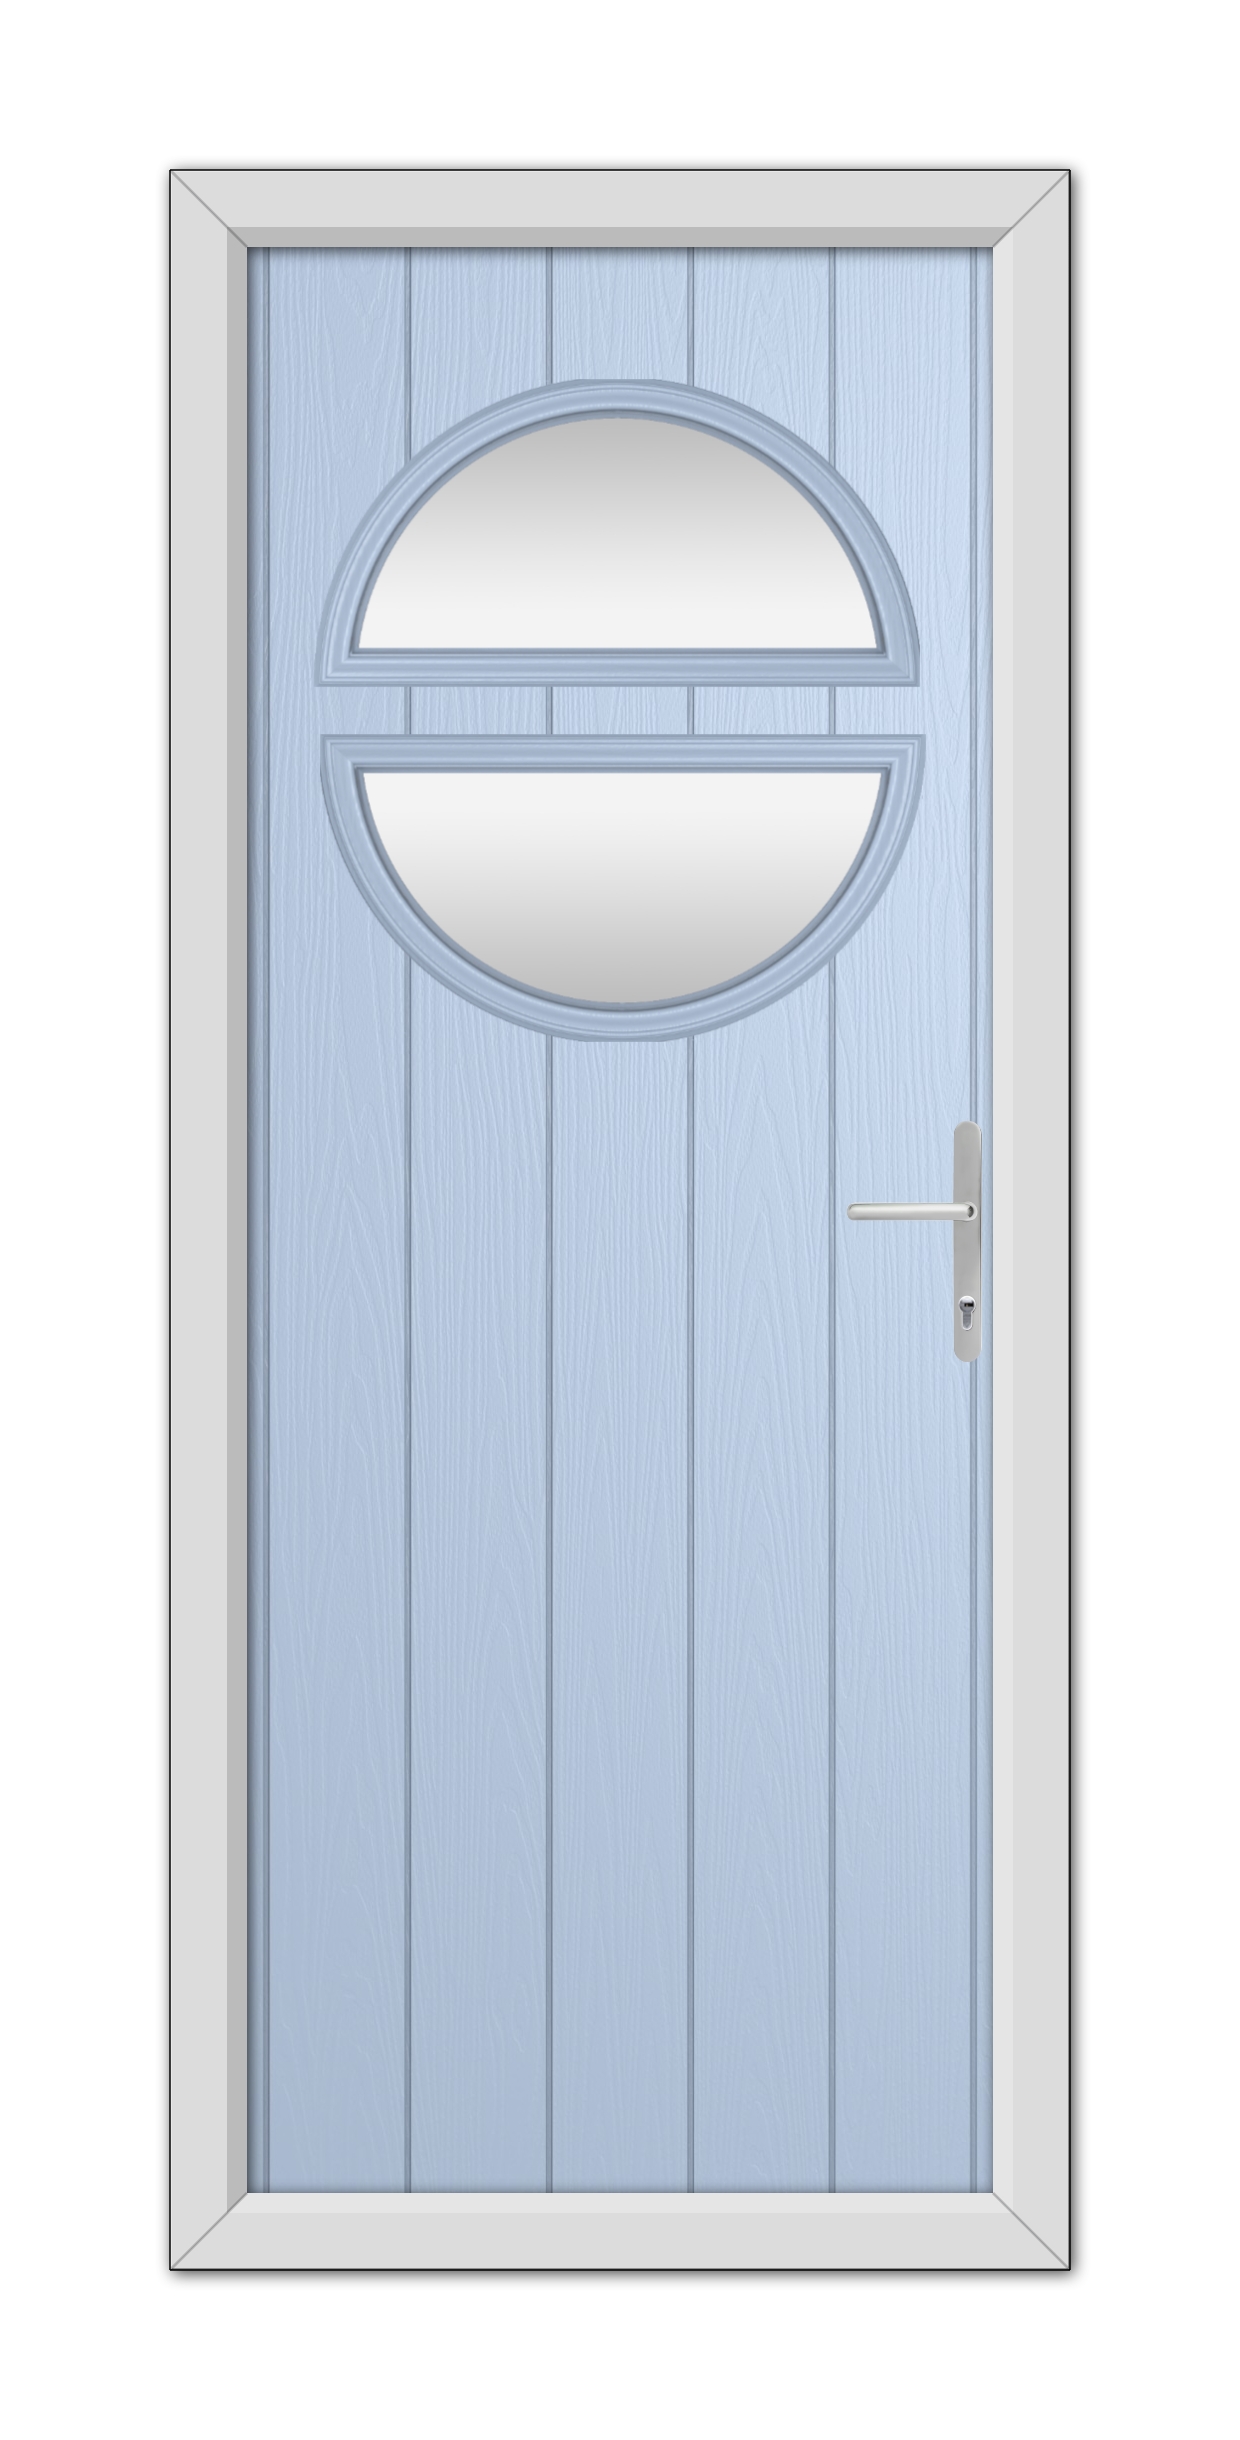 A Duck Egg Blue Kent Composite Door 48mm Timber Core with an elliptical window and a modern handle, set within a white frame.